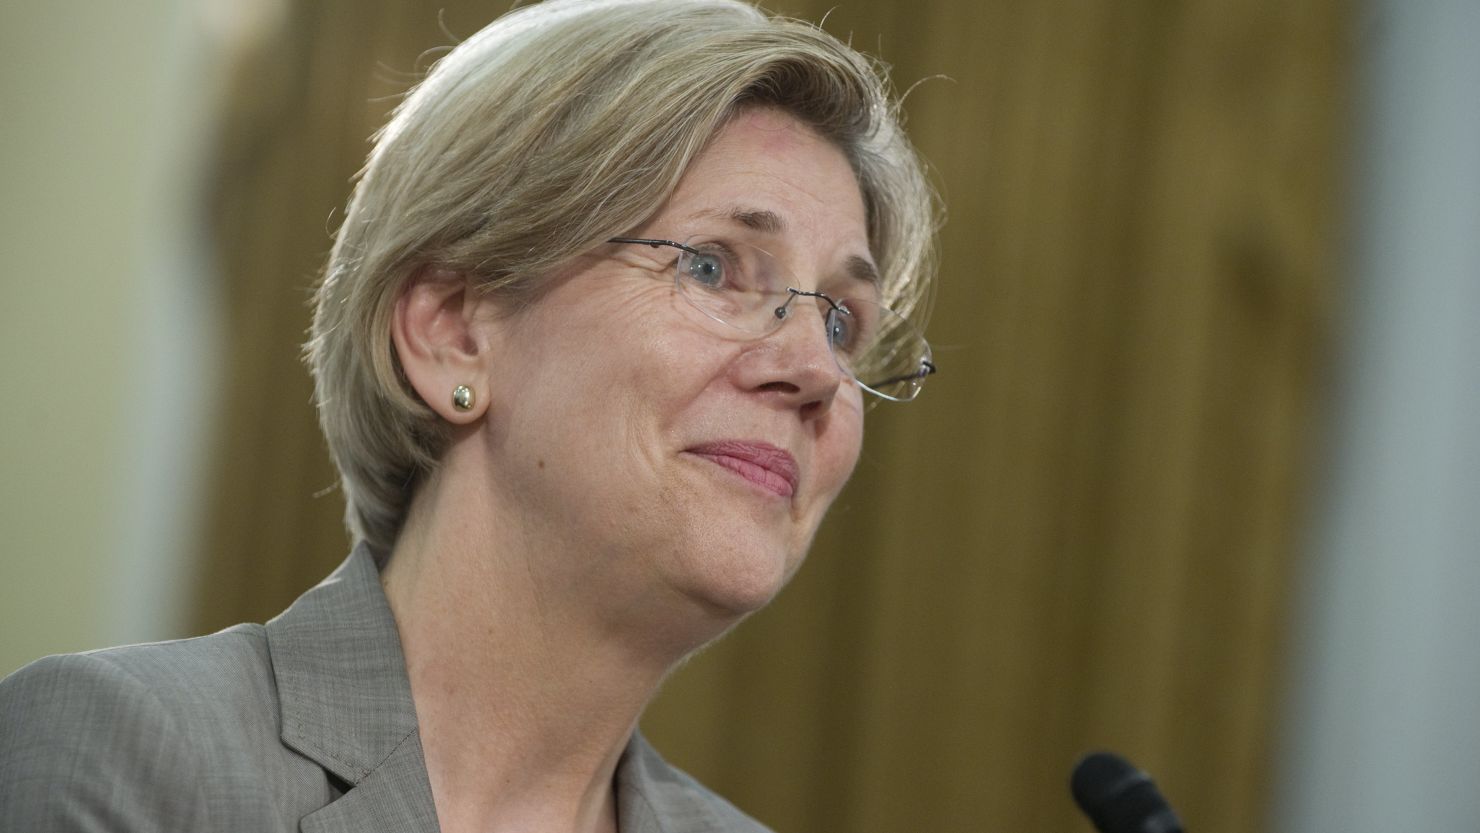 Elizabeth Warren, running against Massachusetts Sen. Scott Brown, is campaigning on the theme of aiding the middle class.